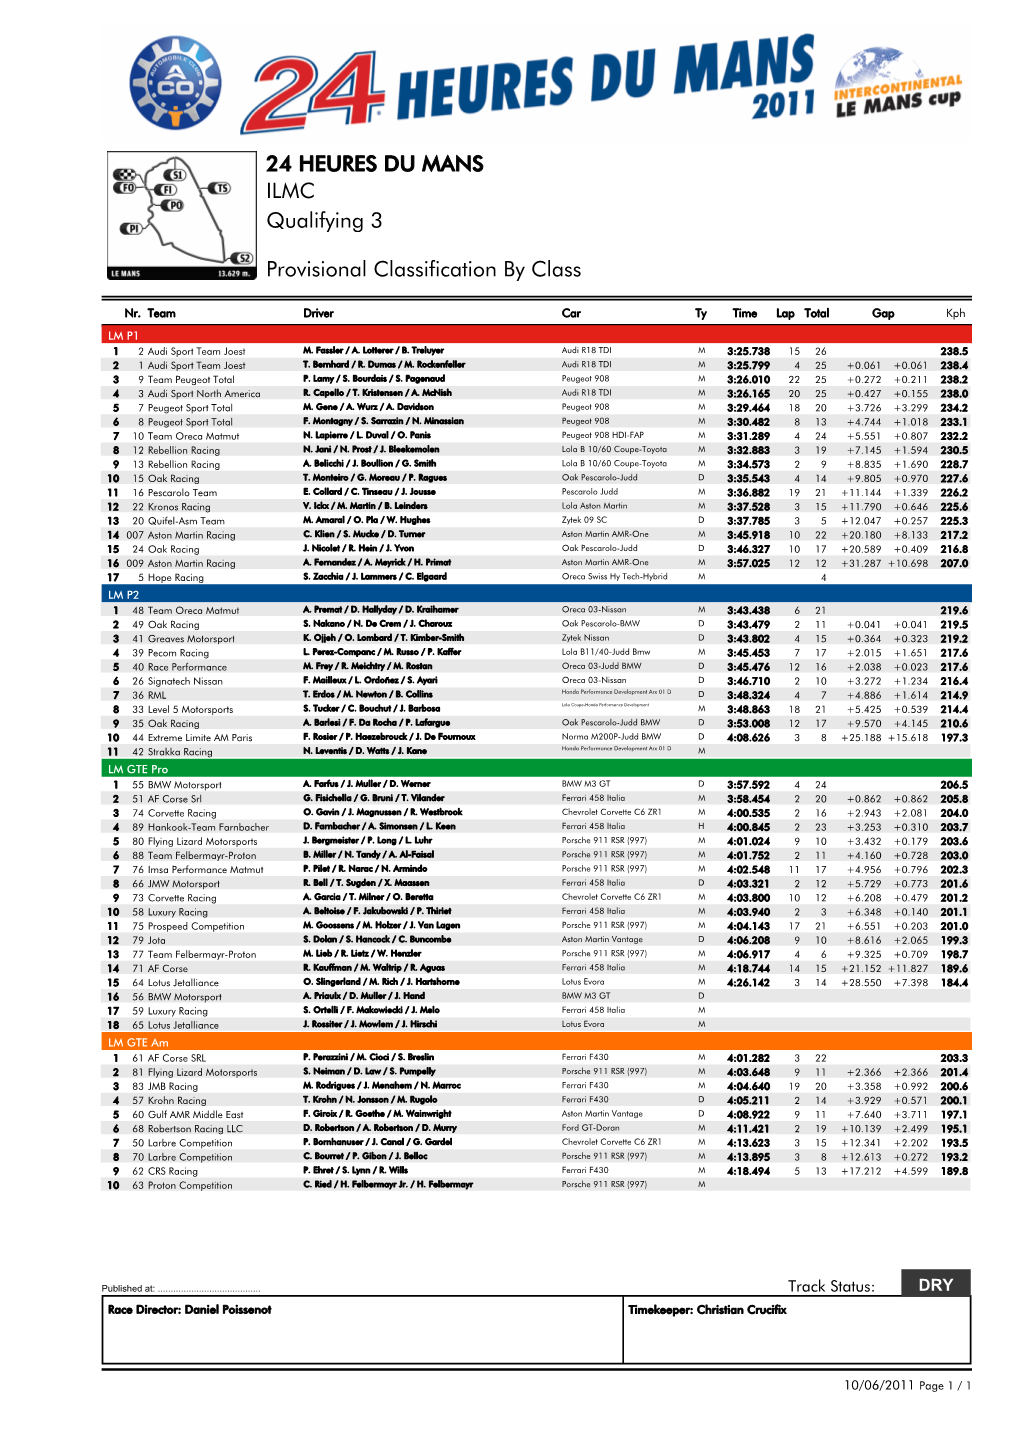 Qualifying 3 ILMC 24 HEURES DU MANS Provisional Classification By